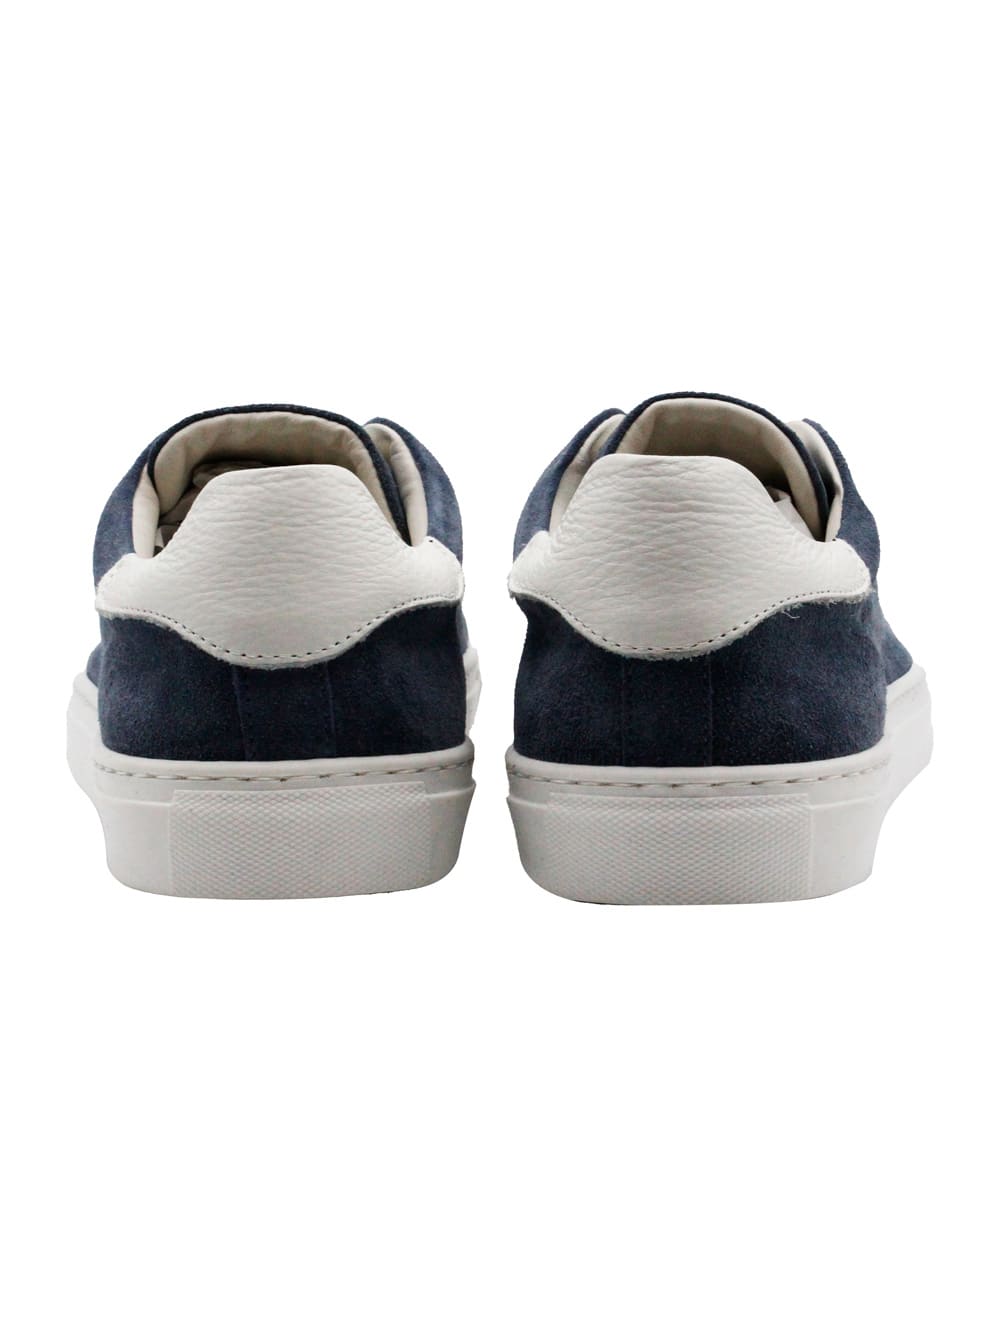 Shop Barba Napoli Sneakers In Soft And Fine Perforated Suede With Lace Closure And Leather Rear Part In Light Blu